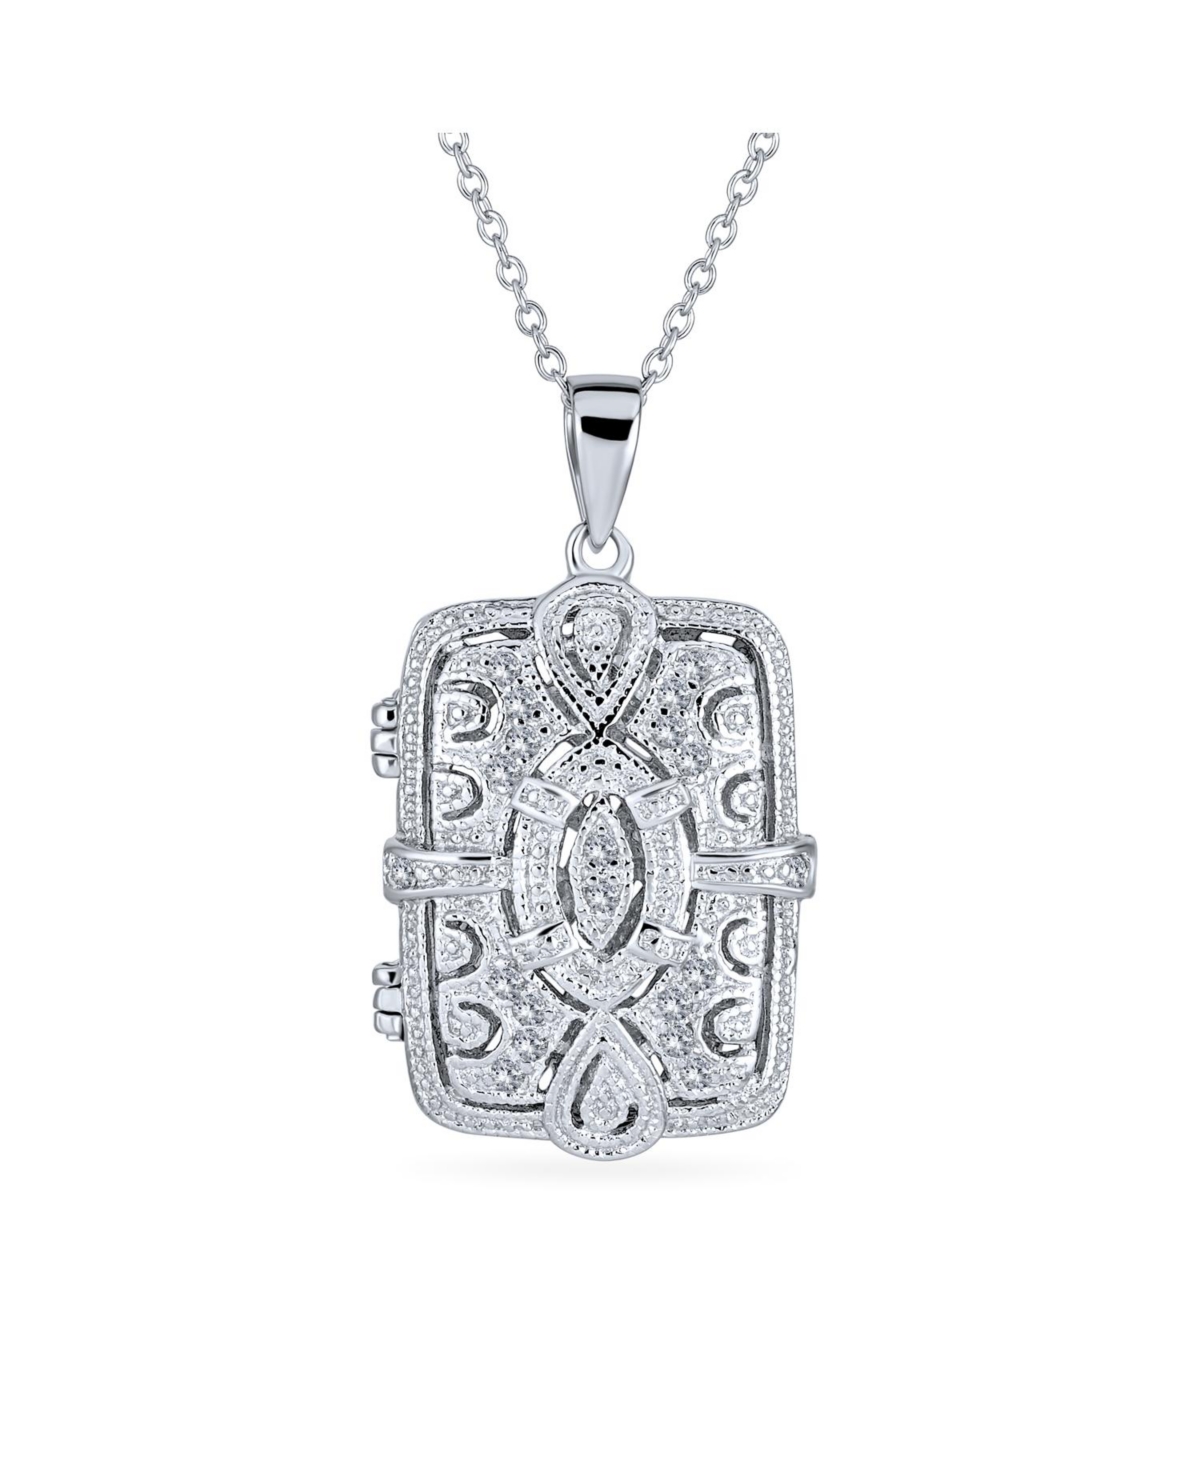 Traditional Filigree Infinity Rectangle Essential Oil Perfume Diffuser Victorian Locket Pendant Necklace For Women .925 Sterling Silver - Clear